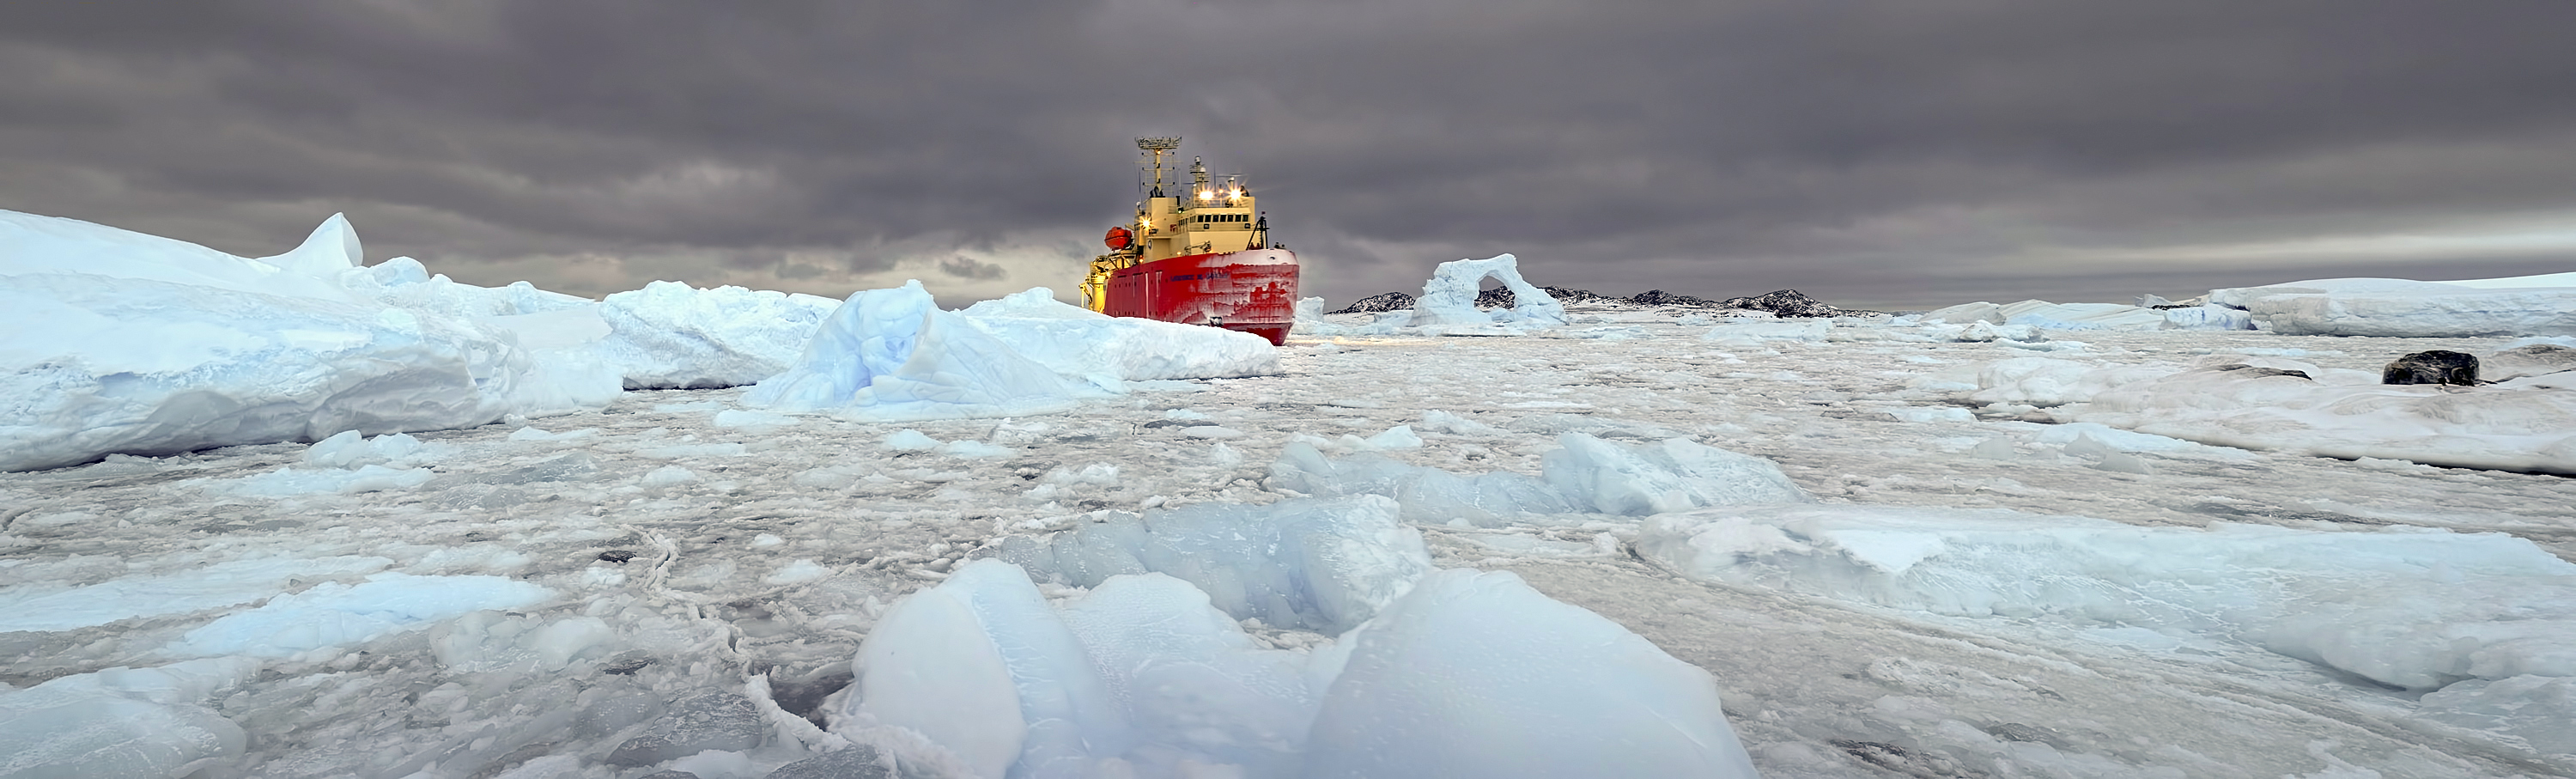 A large ship sails through ice-choked waters.